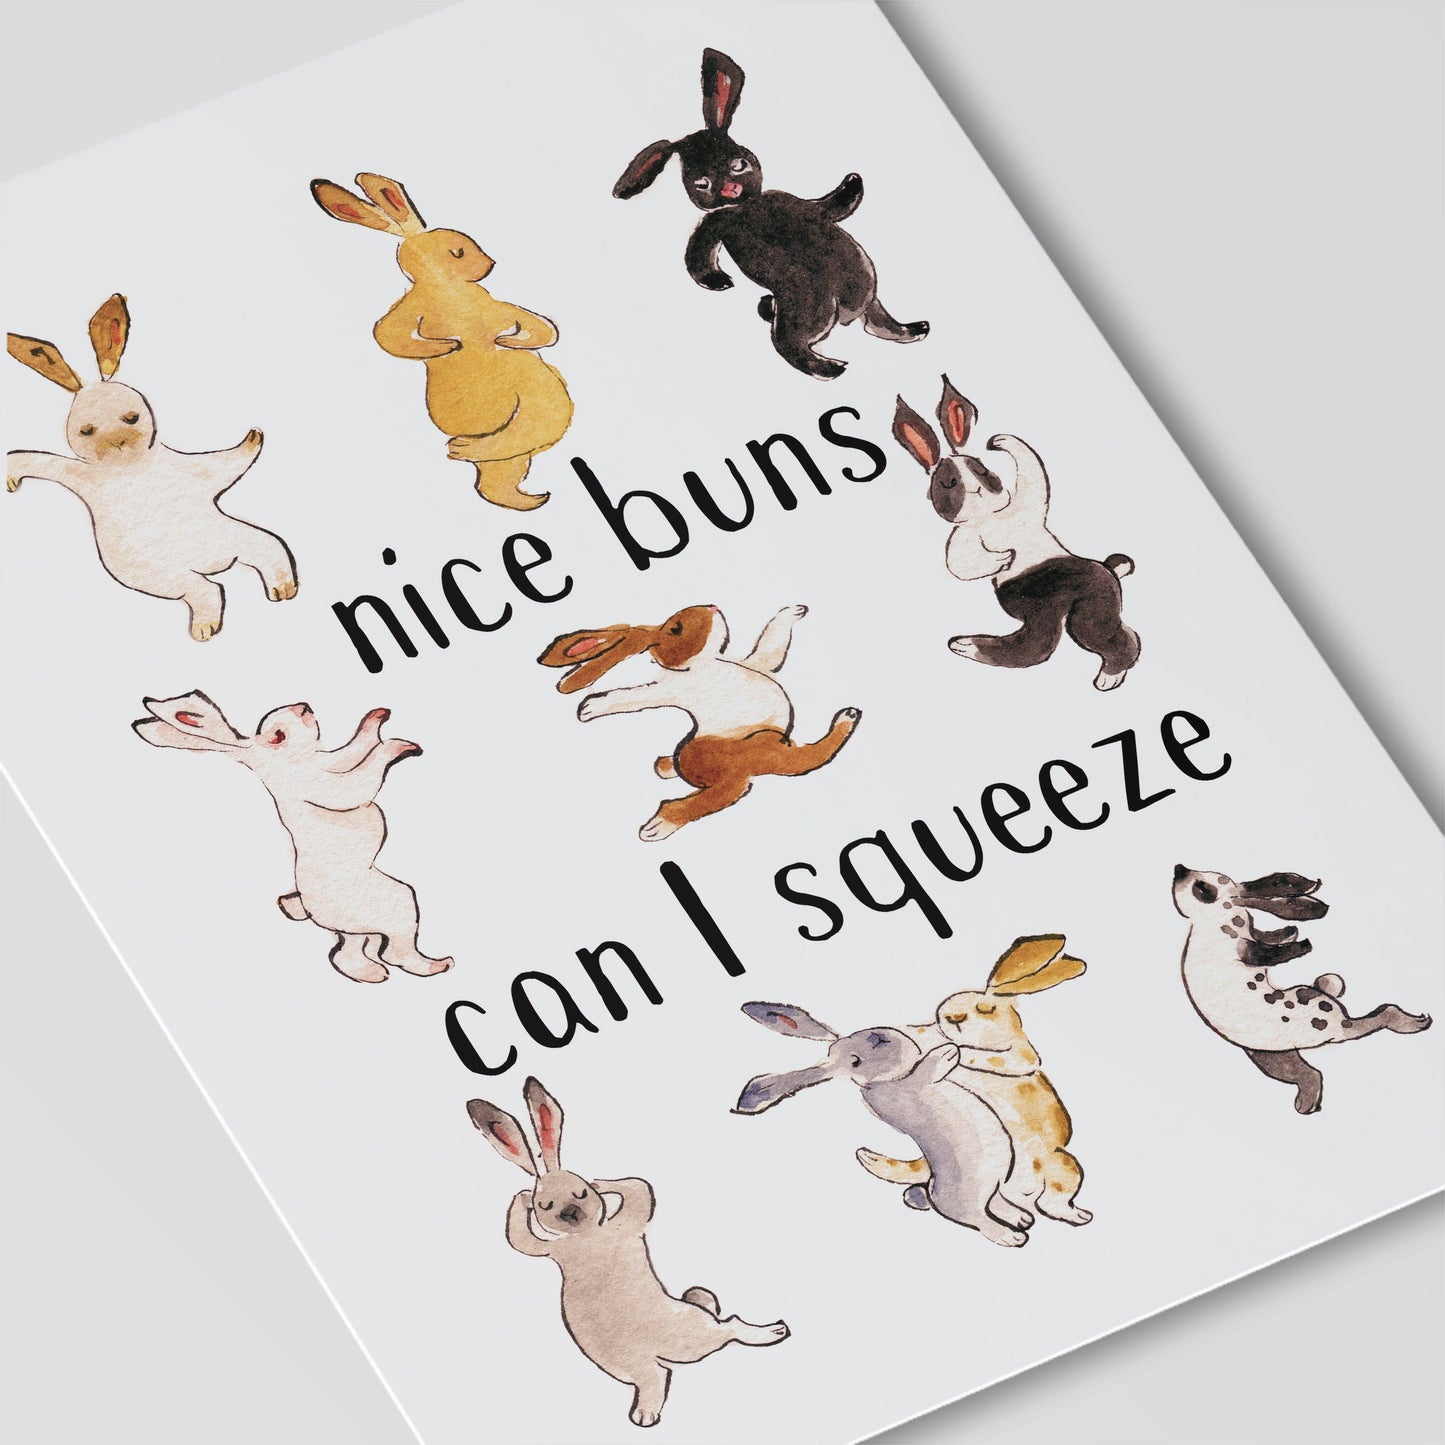 Nice Buns Can I Squeeze Funny Valentines Day Card For Him, Naughty Love Card For Girlfriend, Sexy Bunny Love Card For Husband, Butt Cards